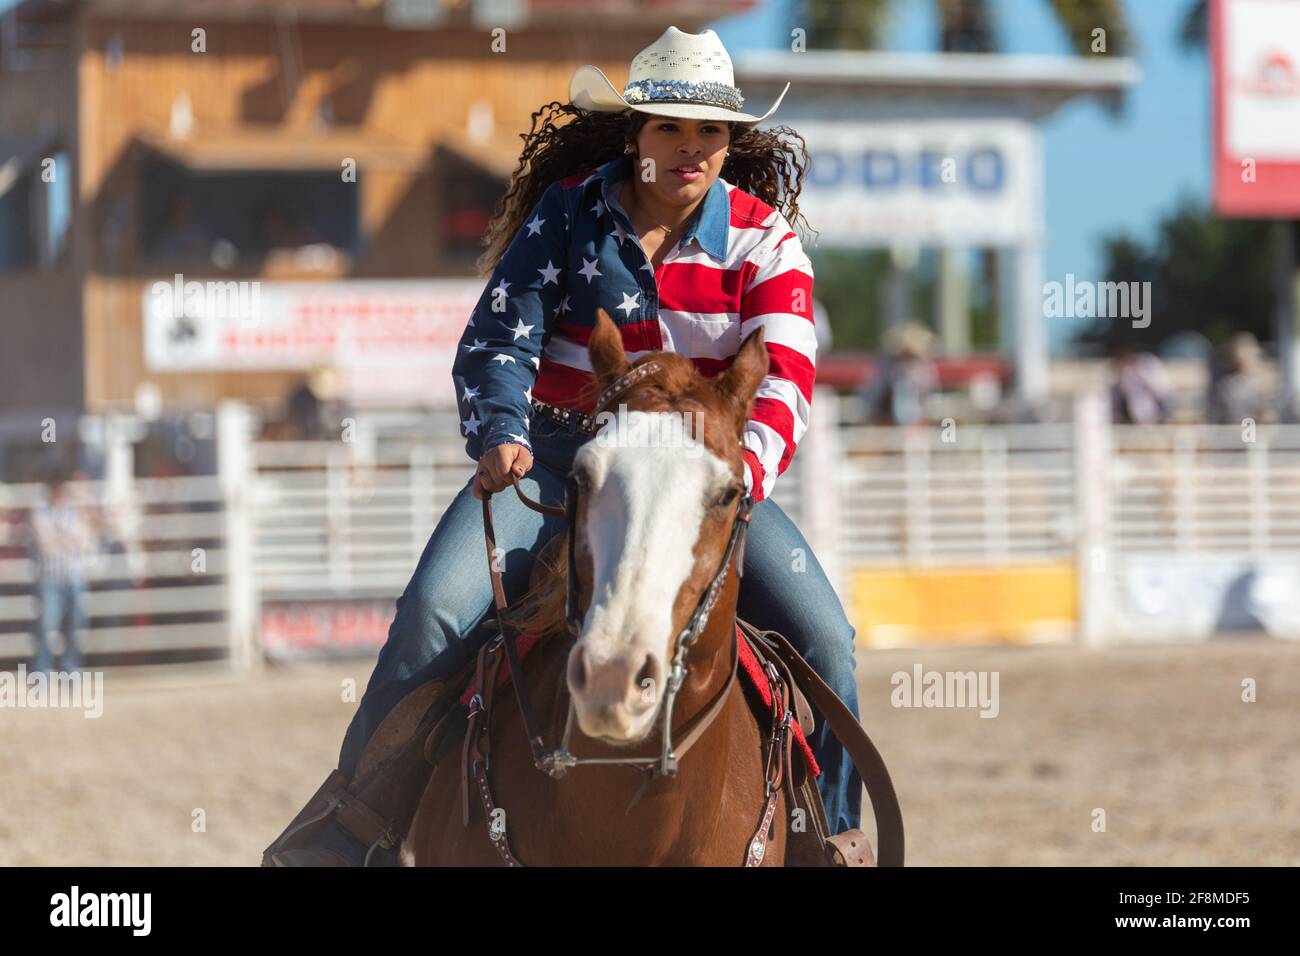 Homestead, Florida/USA - January 26, 2020: Annual Homestead Championship Rodeo, unique western sporting event. Bull riding competition at Homestead. Stock Photo